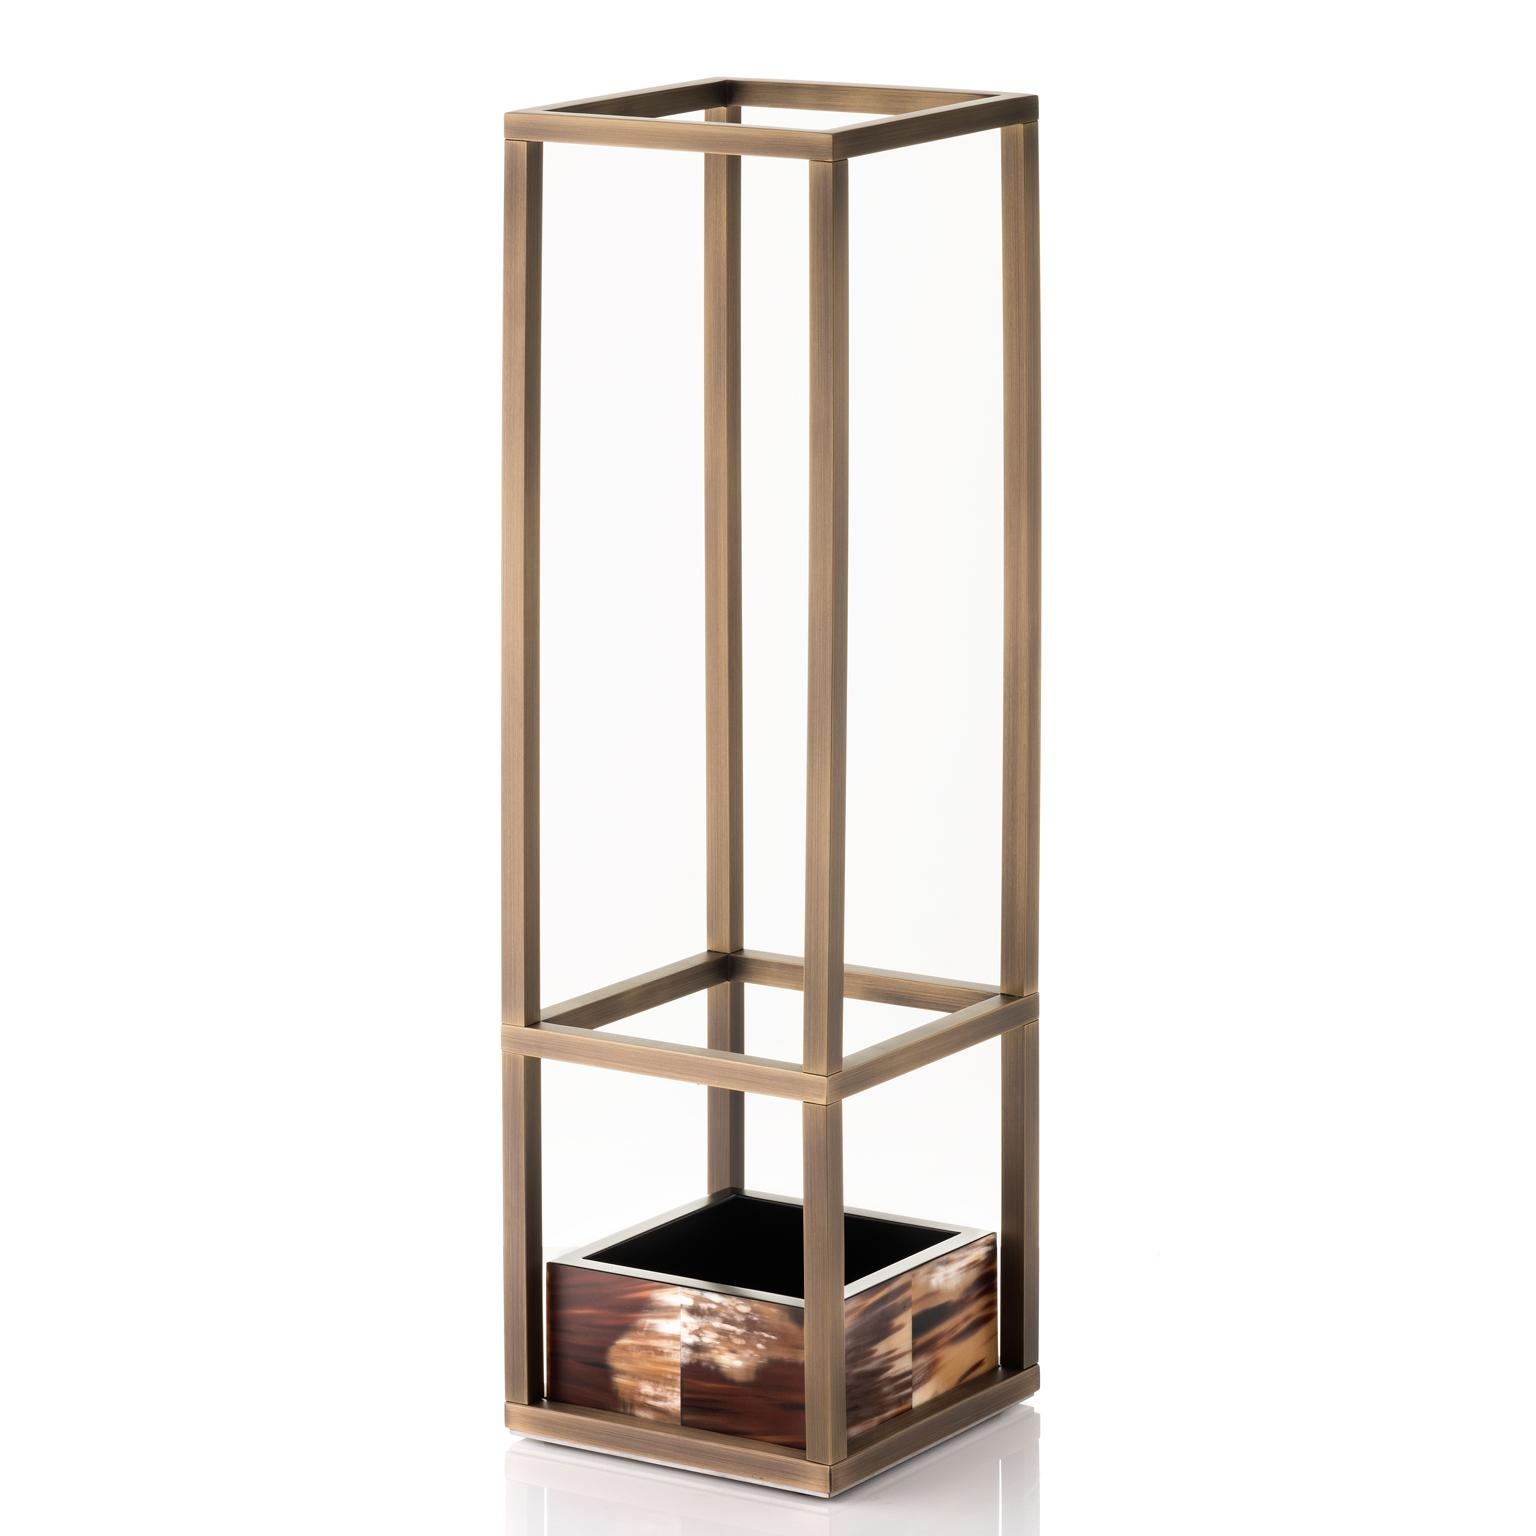 Lacquered Pluvio Umbrella Stand in Corno Italiano, Wood and Stainless Steel, Mod. 1434 For Sale